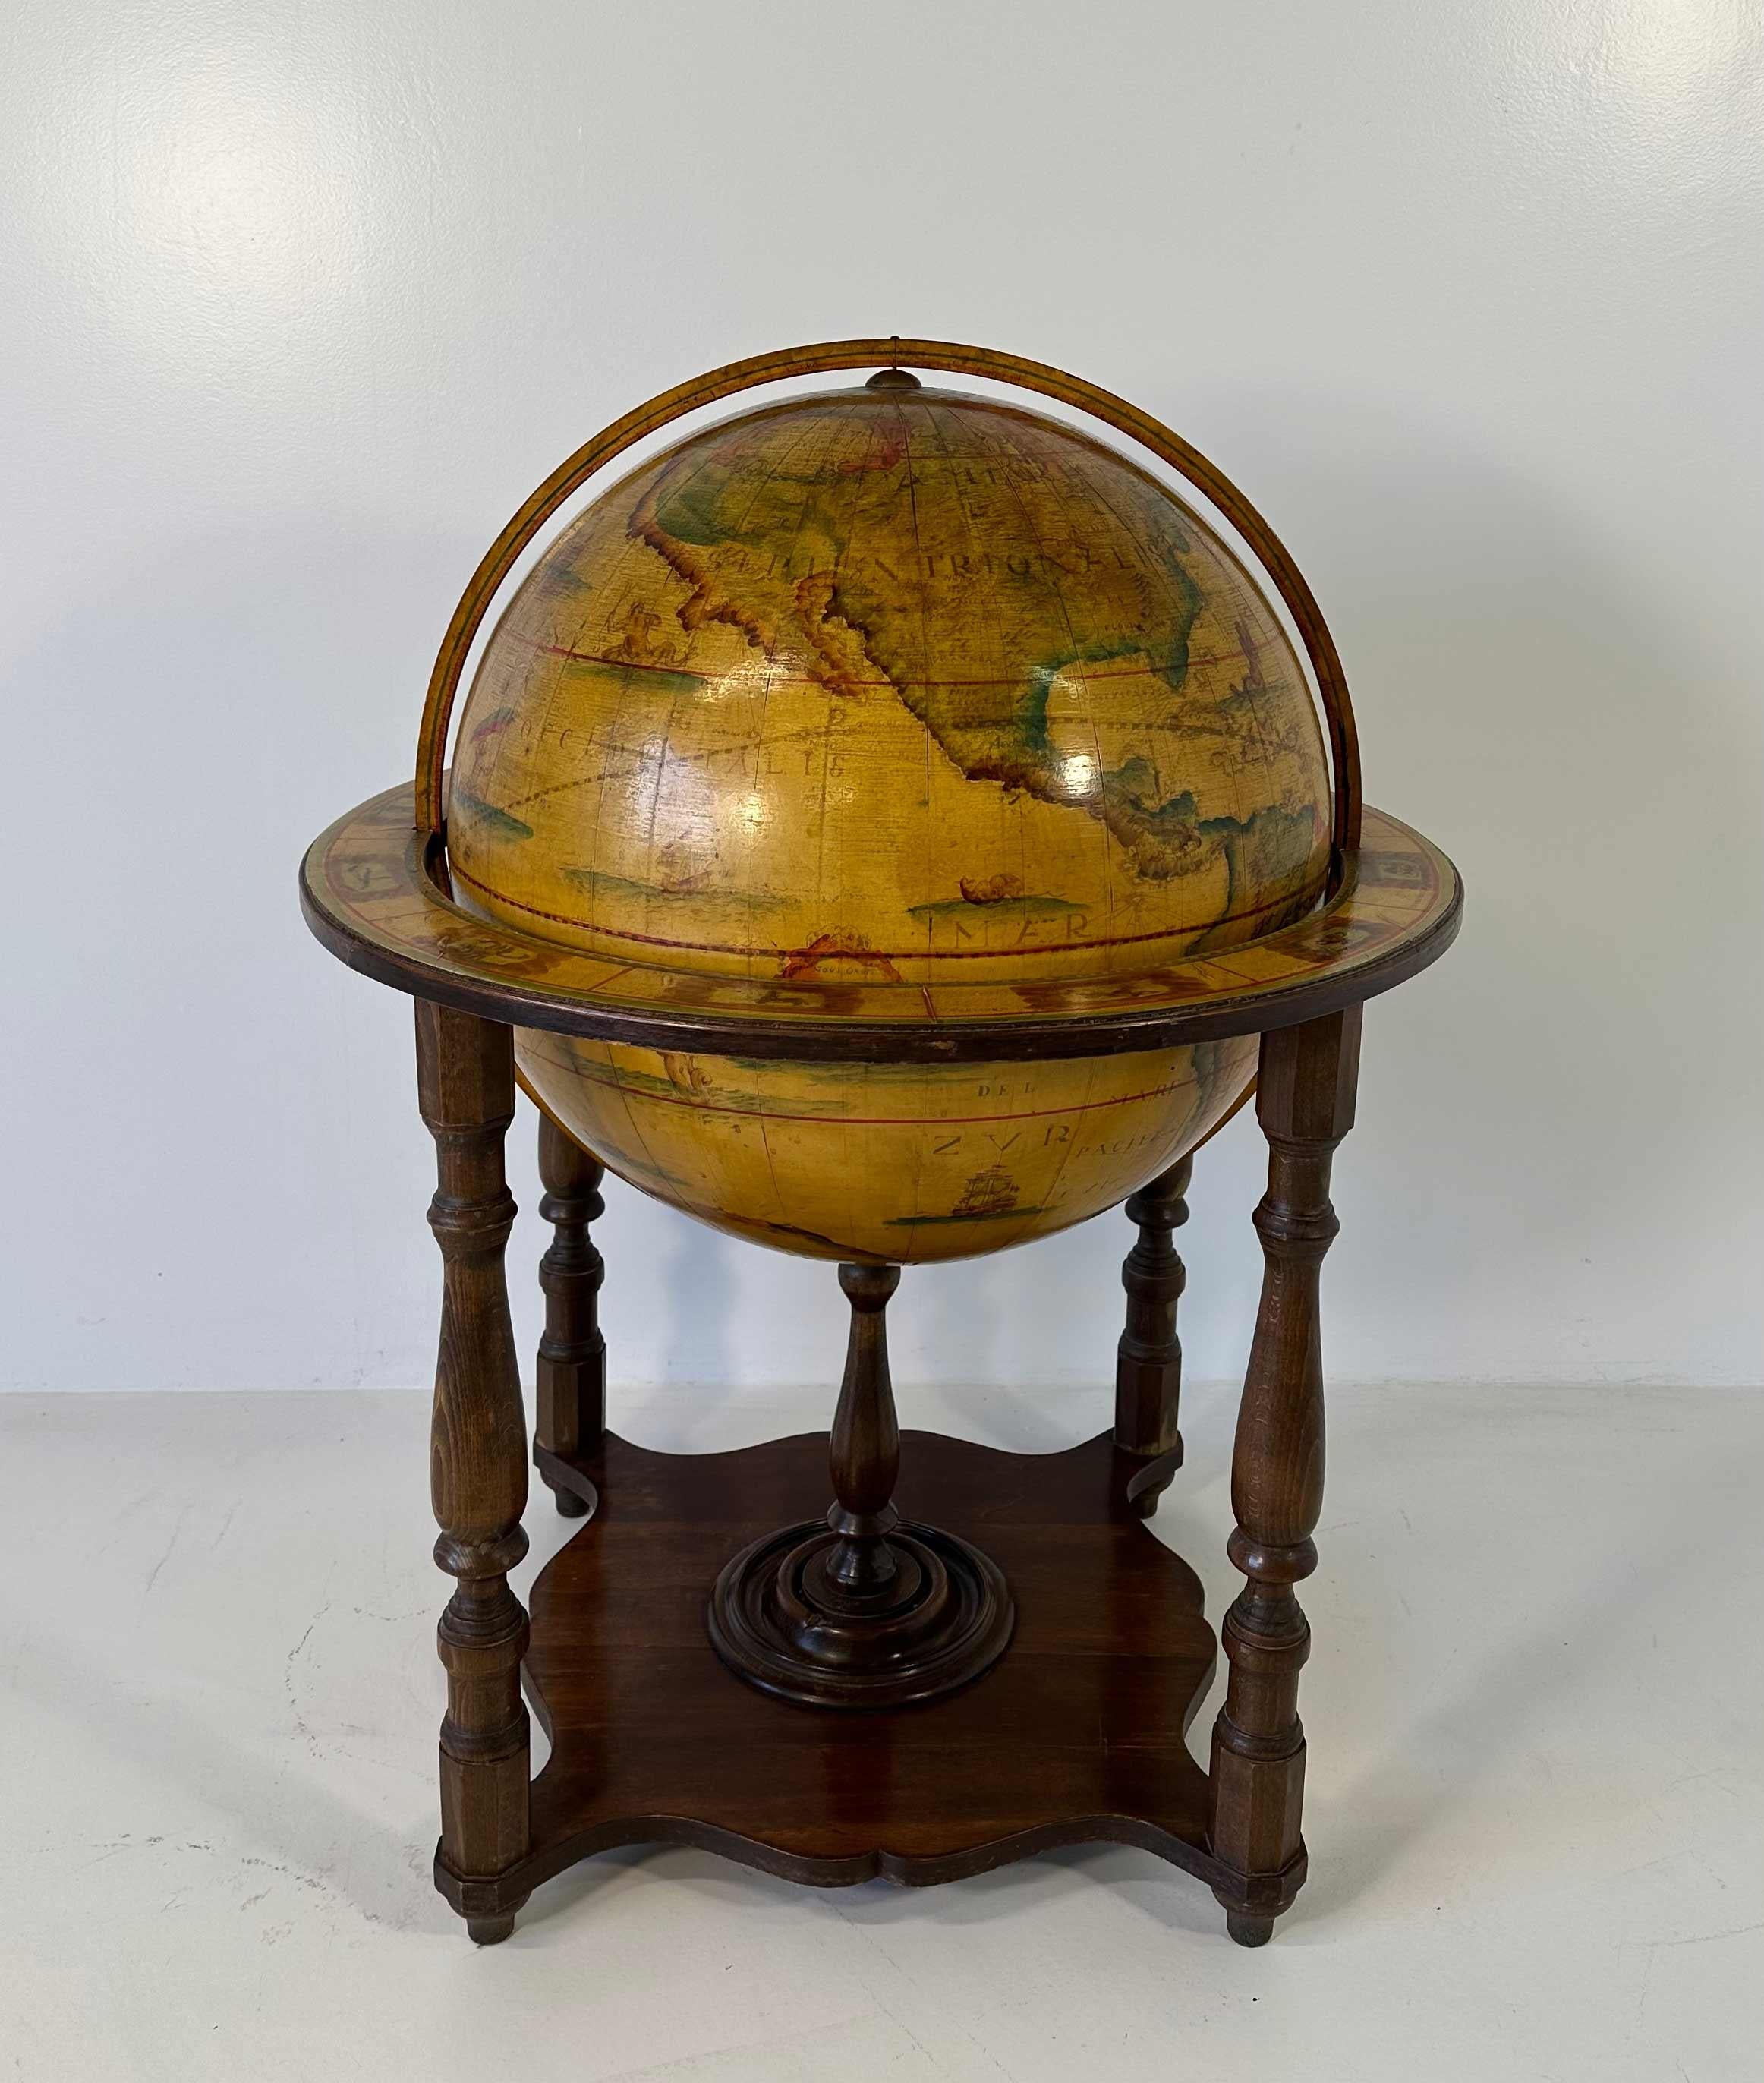 This wood globe was produced in Italy in the 1970s. 
It is completely made of wood and covered with antique style paper depicting, indeed a map of the world. 
In very good vintage conditions.